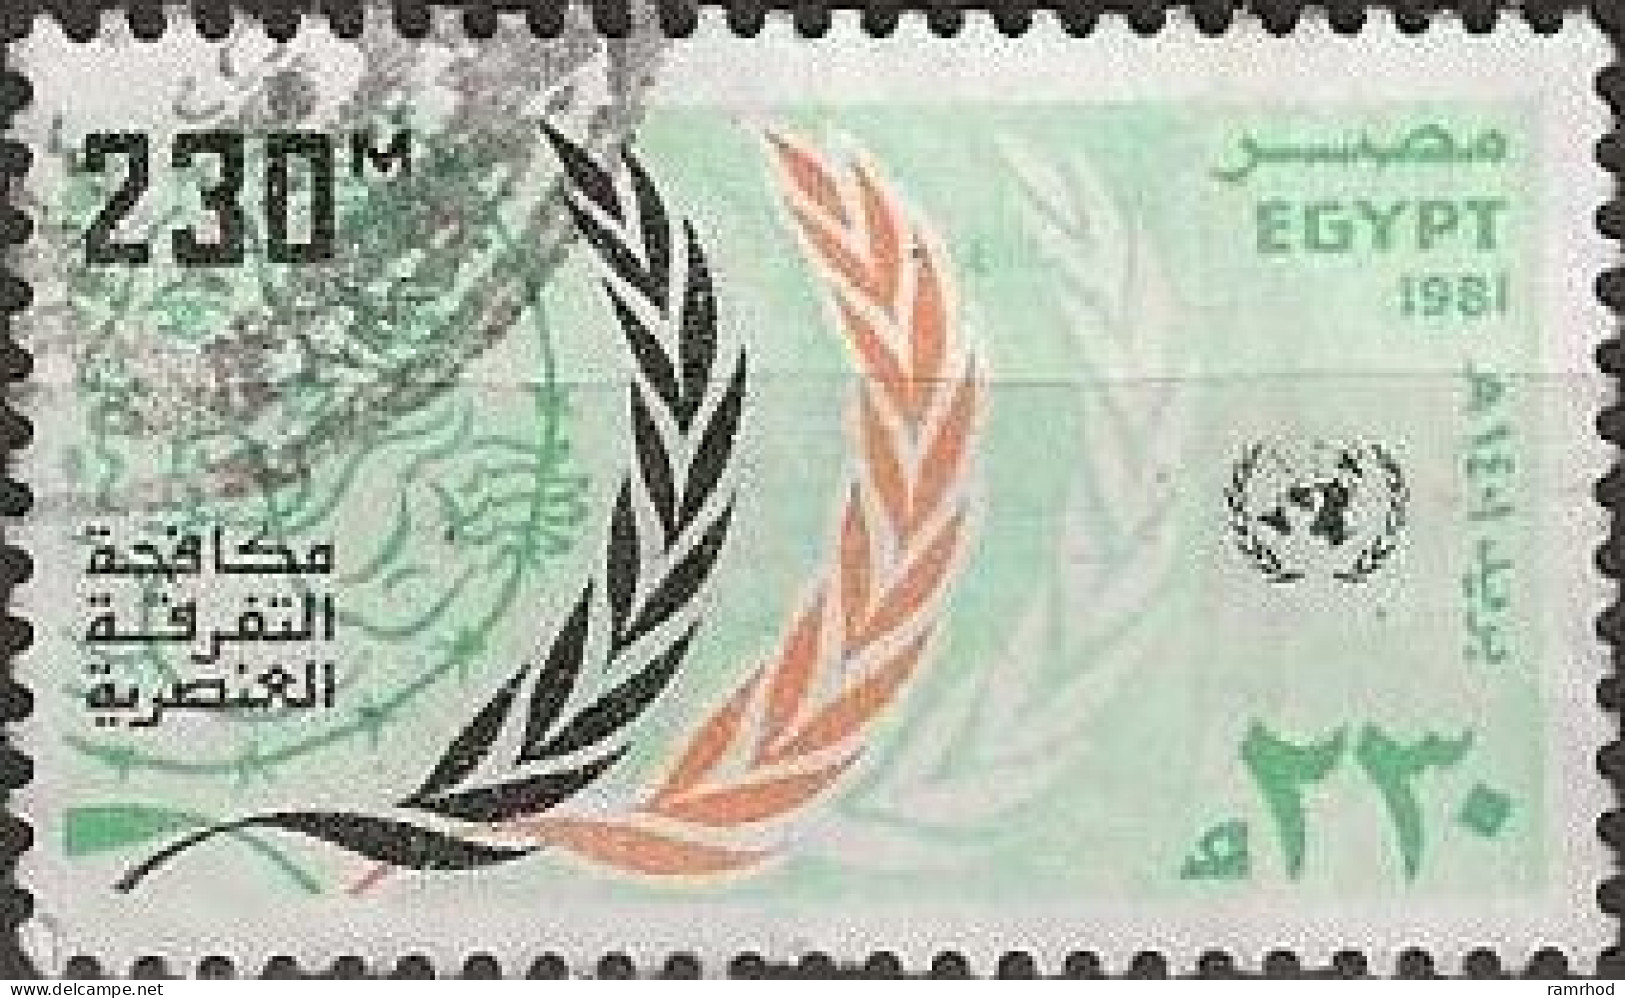 EGYPT 1981 United Nations Day - 230m. Olive Branches (Racial Discrimination Day) FU - Usati